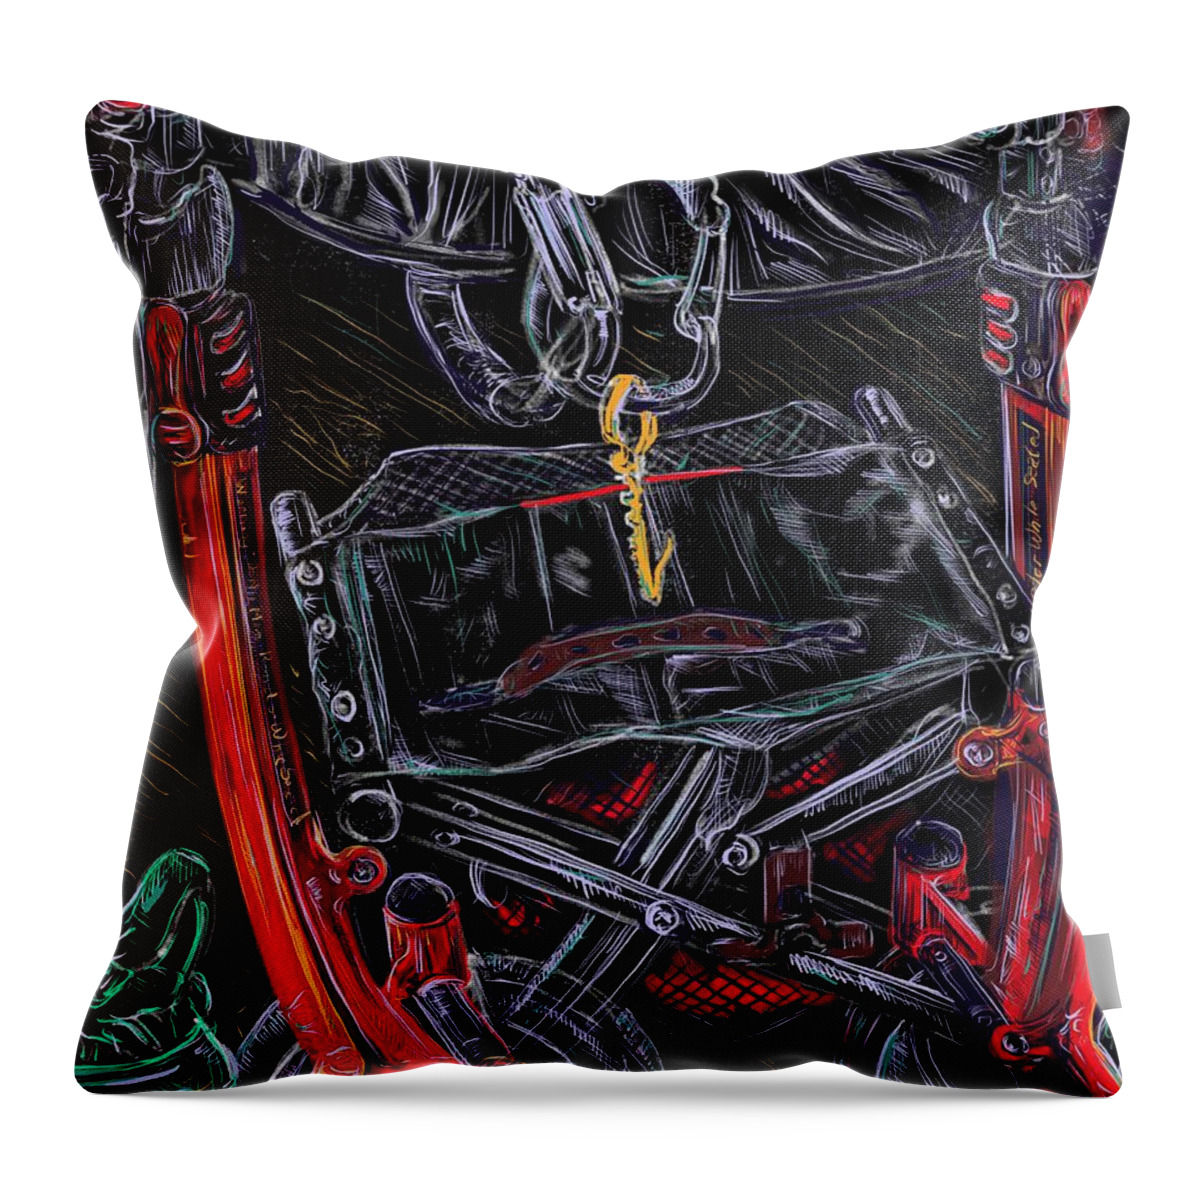 Rollator Throw Pillow featuring the digital art Mobility Equipment by Angela Weddle